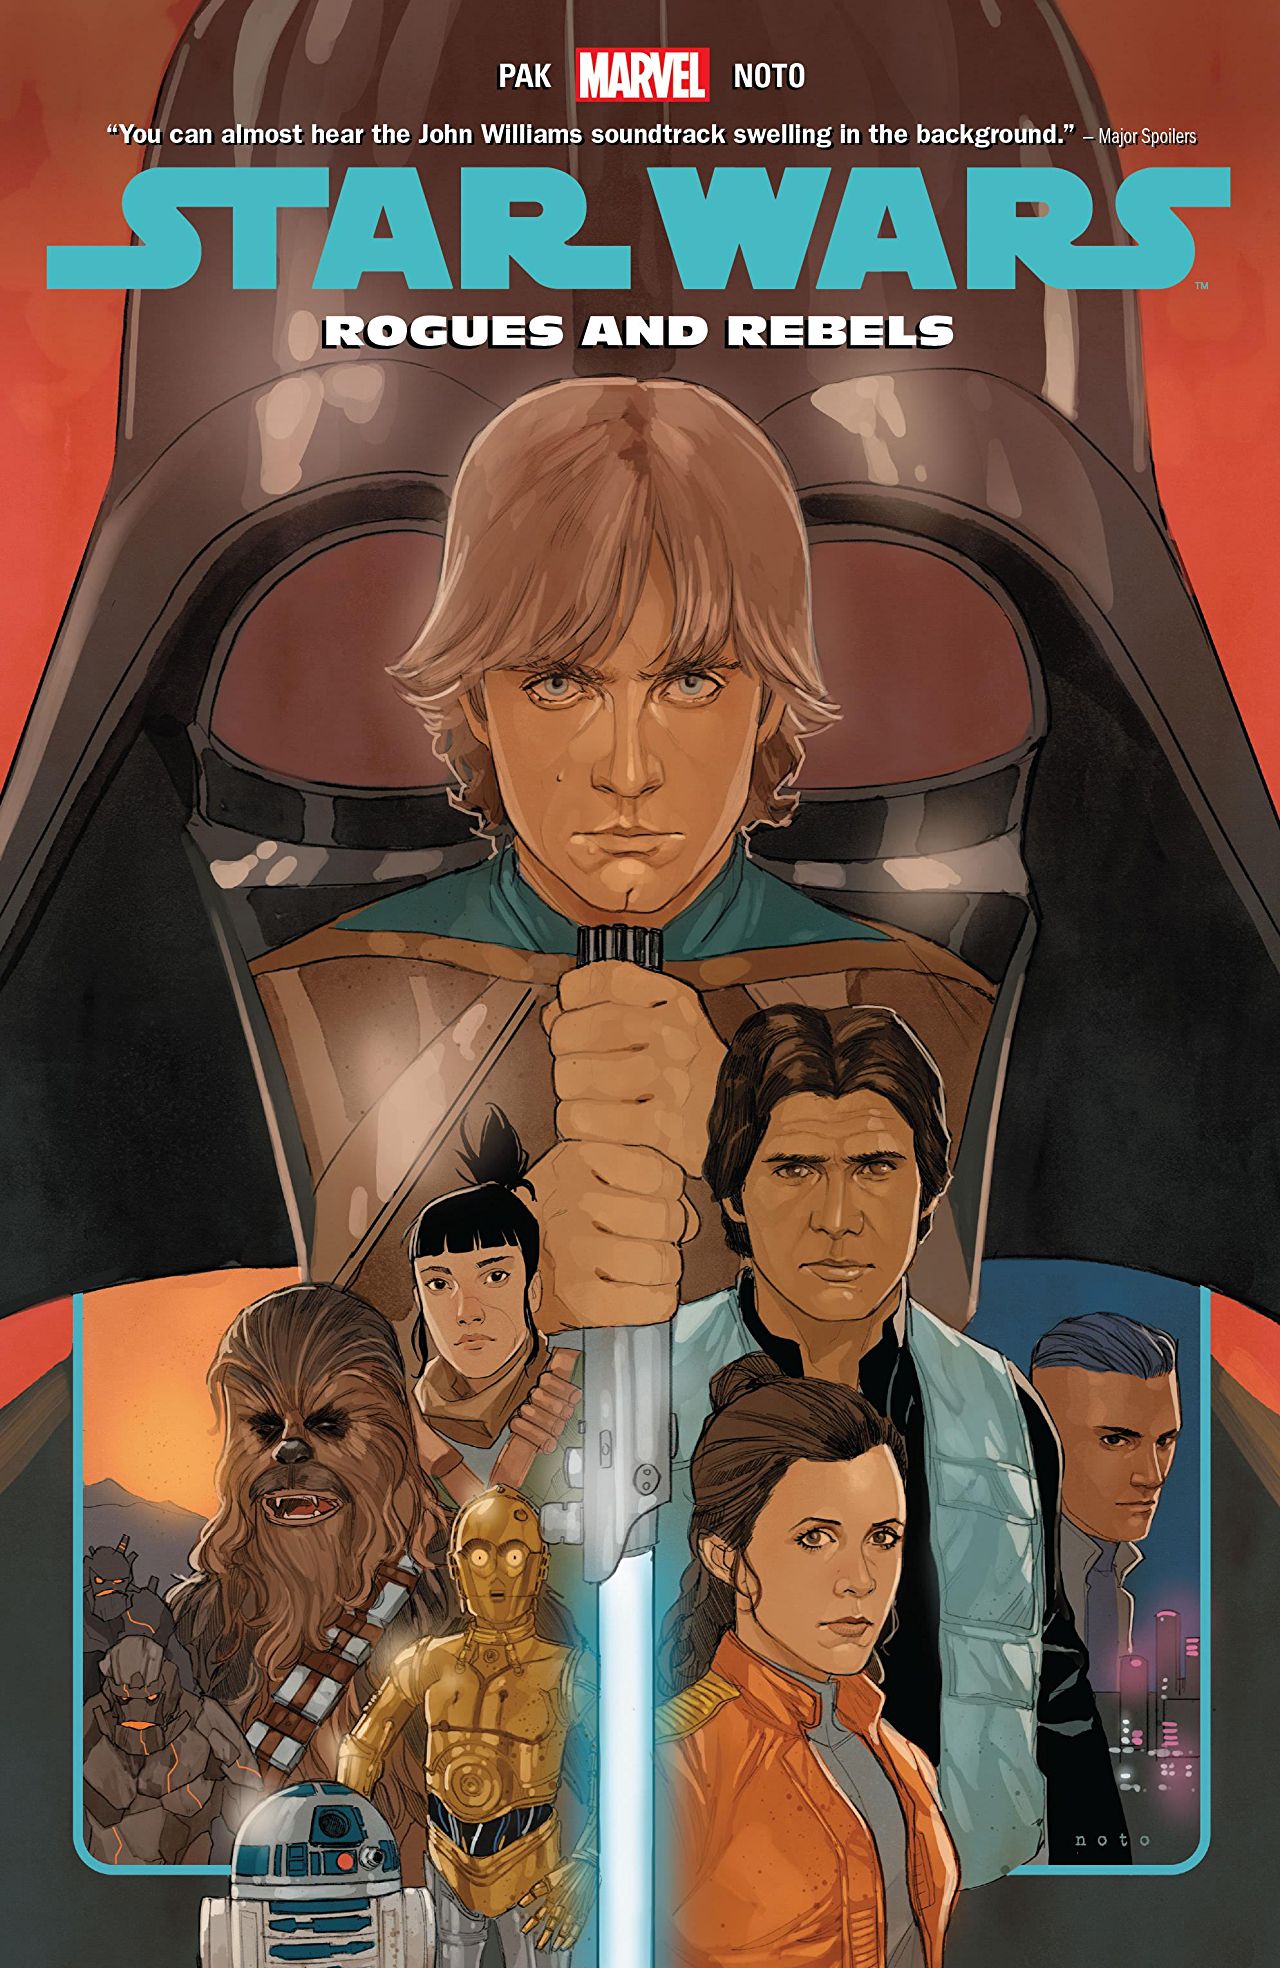 Star Wars Graphic Novel Volume 13 Rogues and Rebels